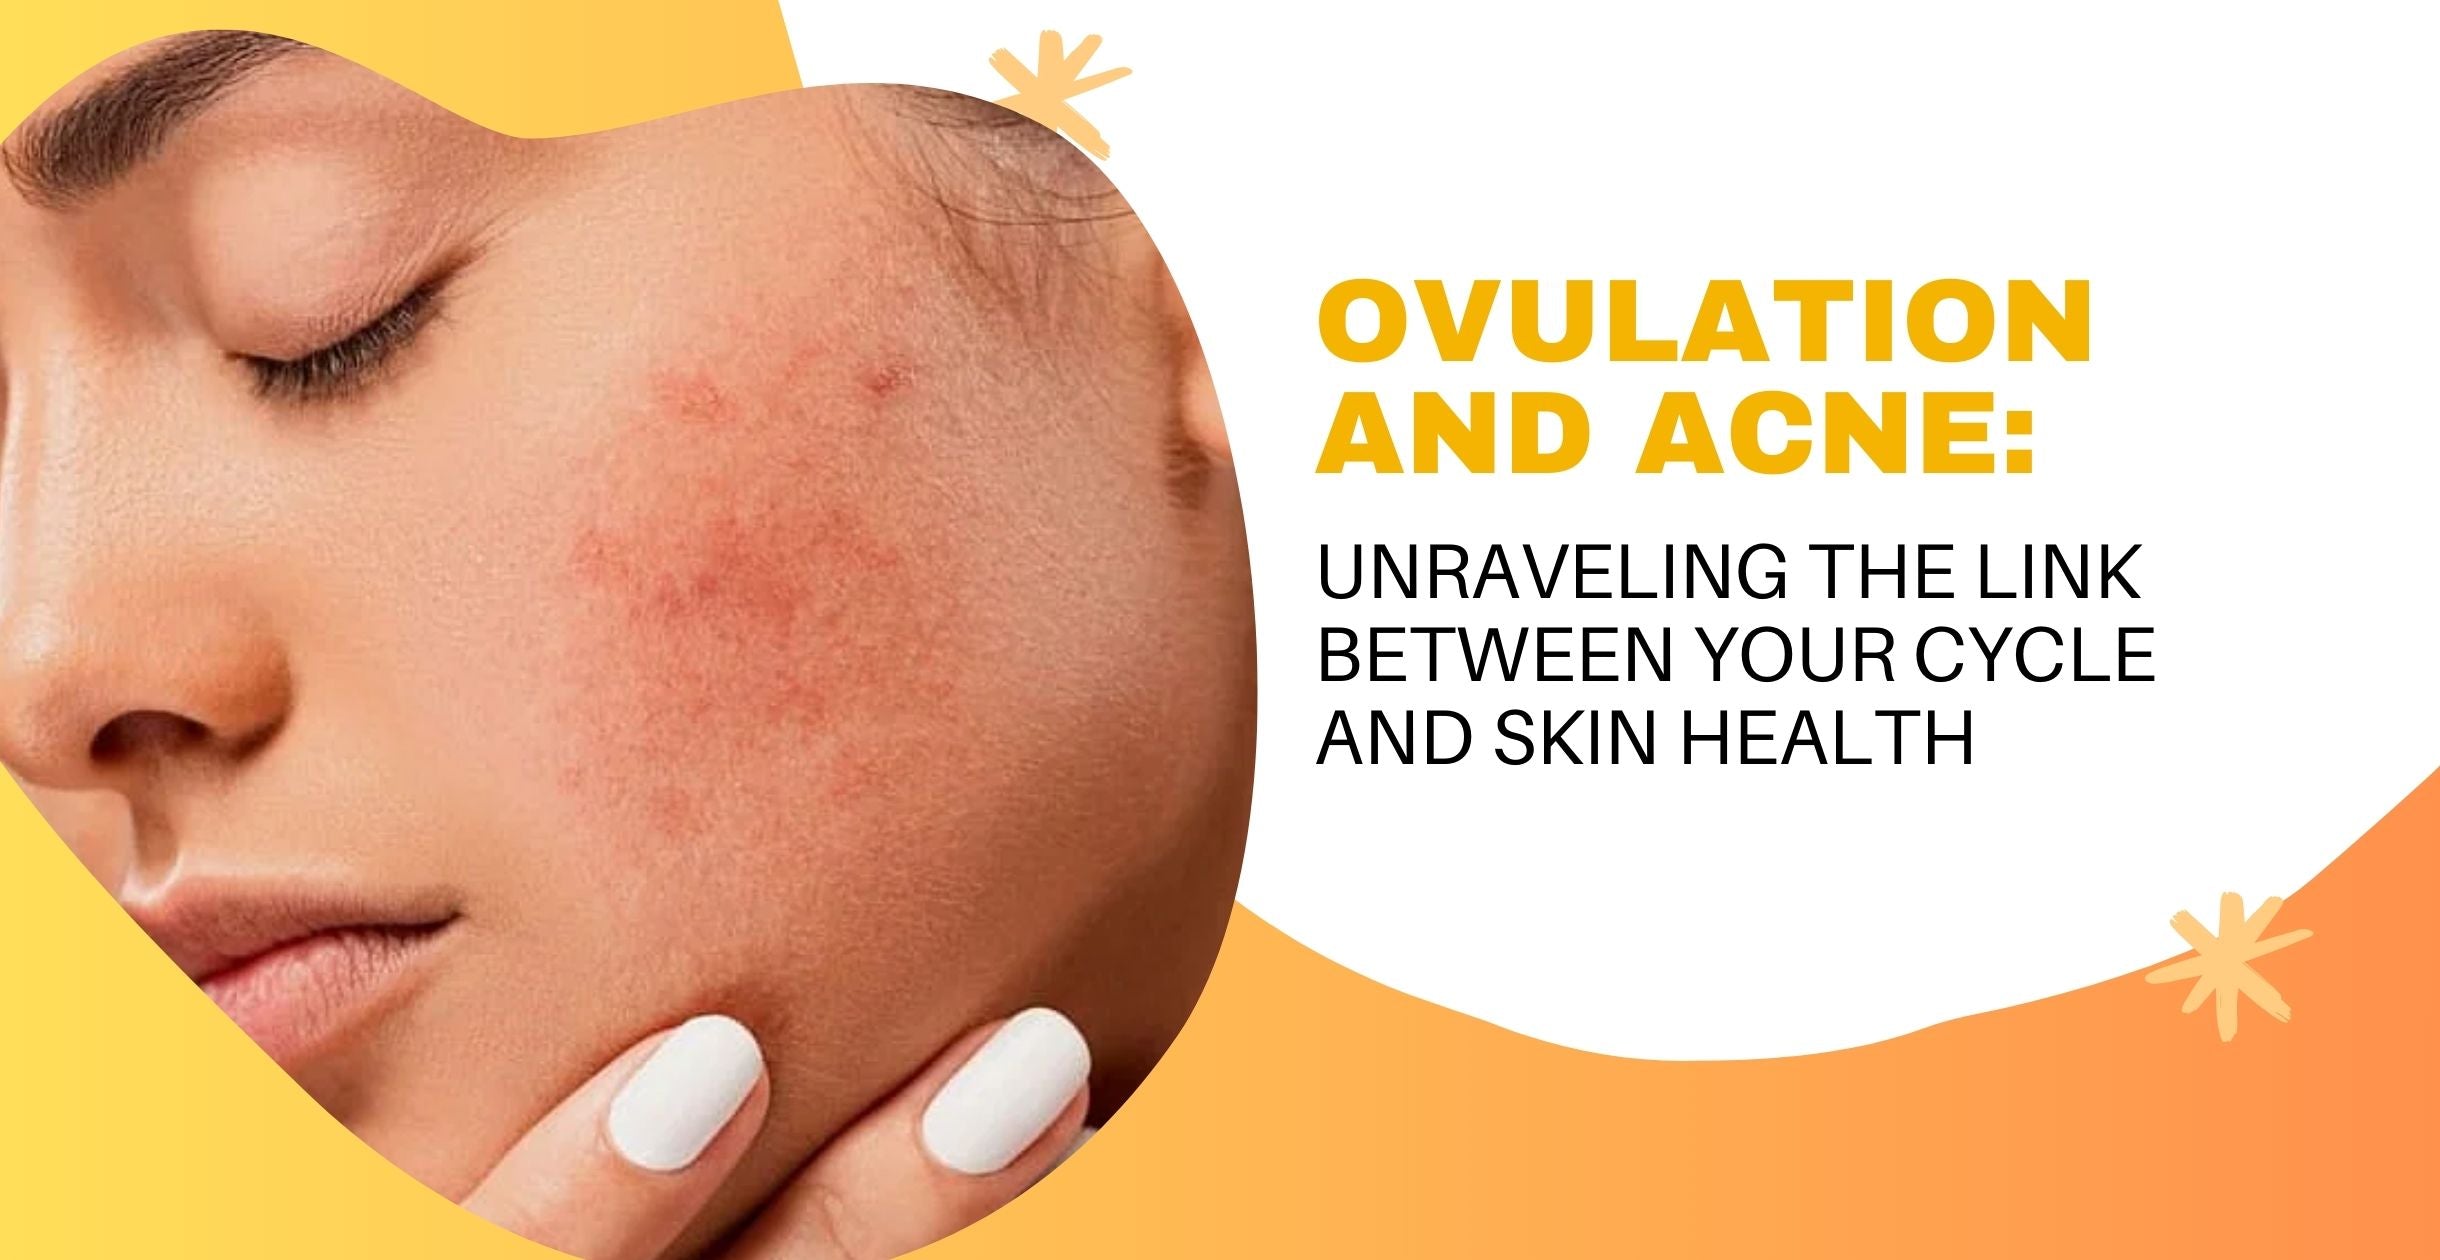 Ovulation and acne: Unraveling the link between your cycle and skin health